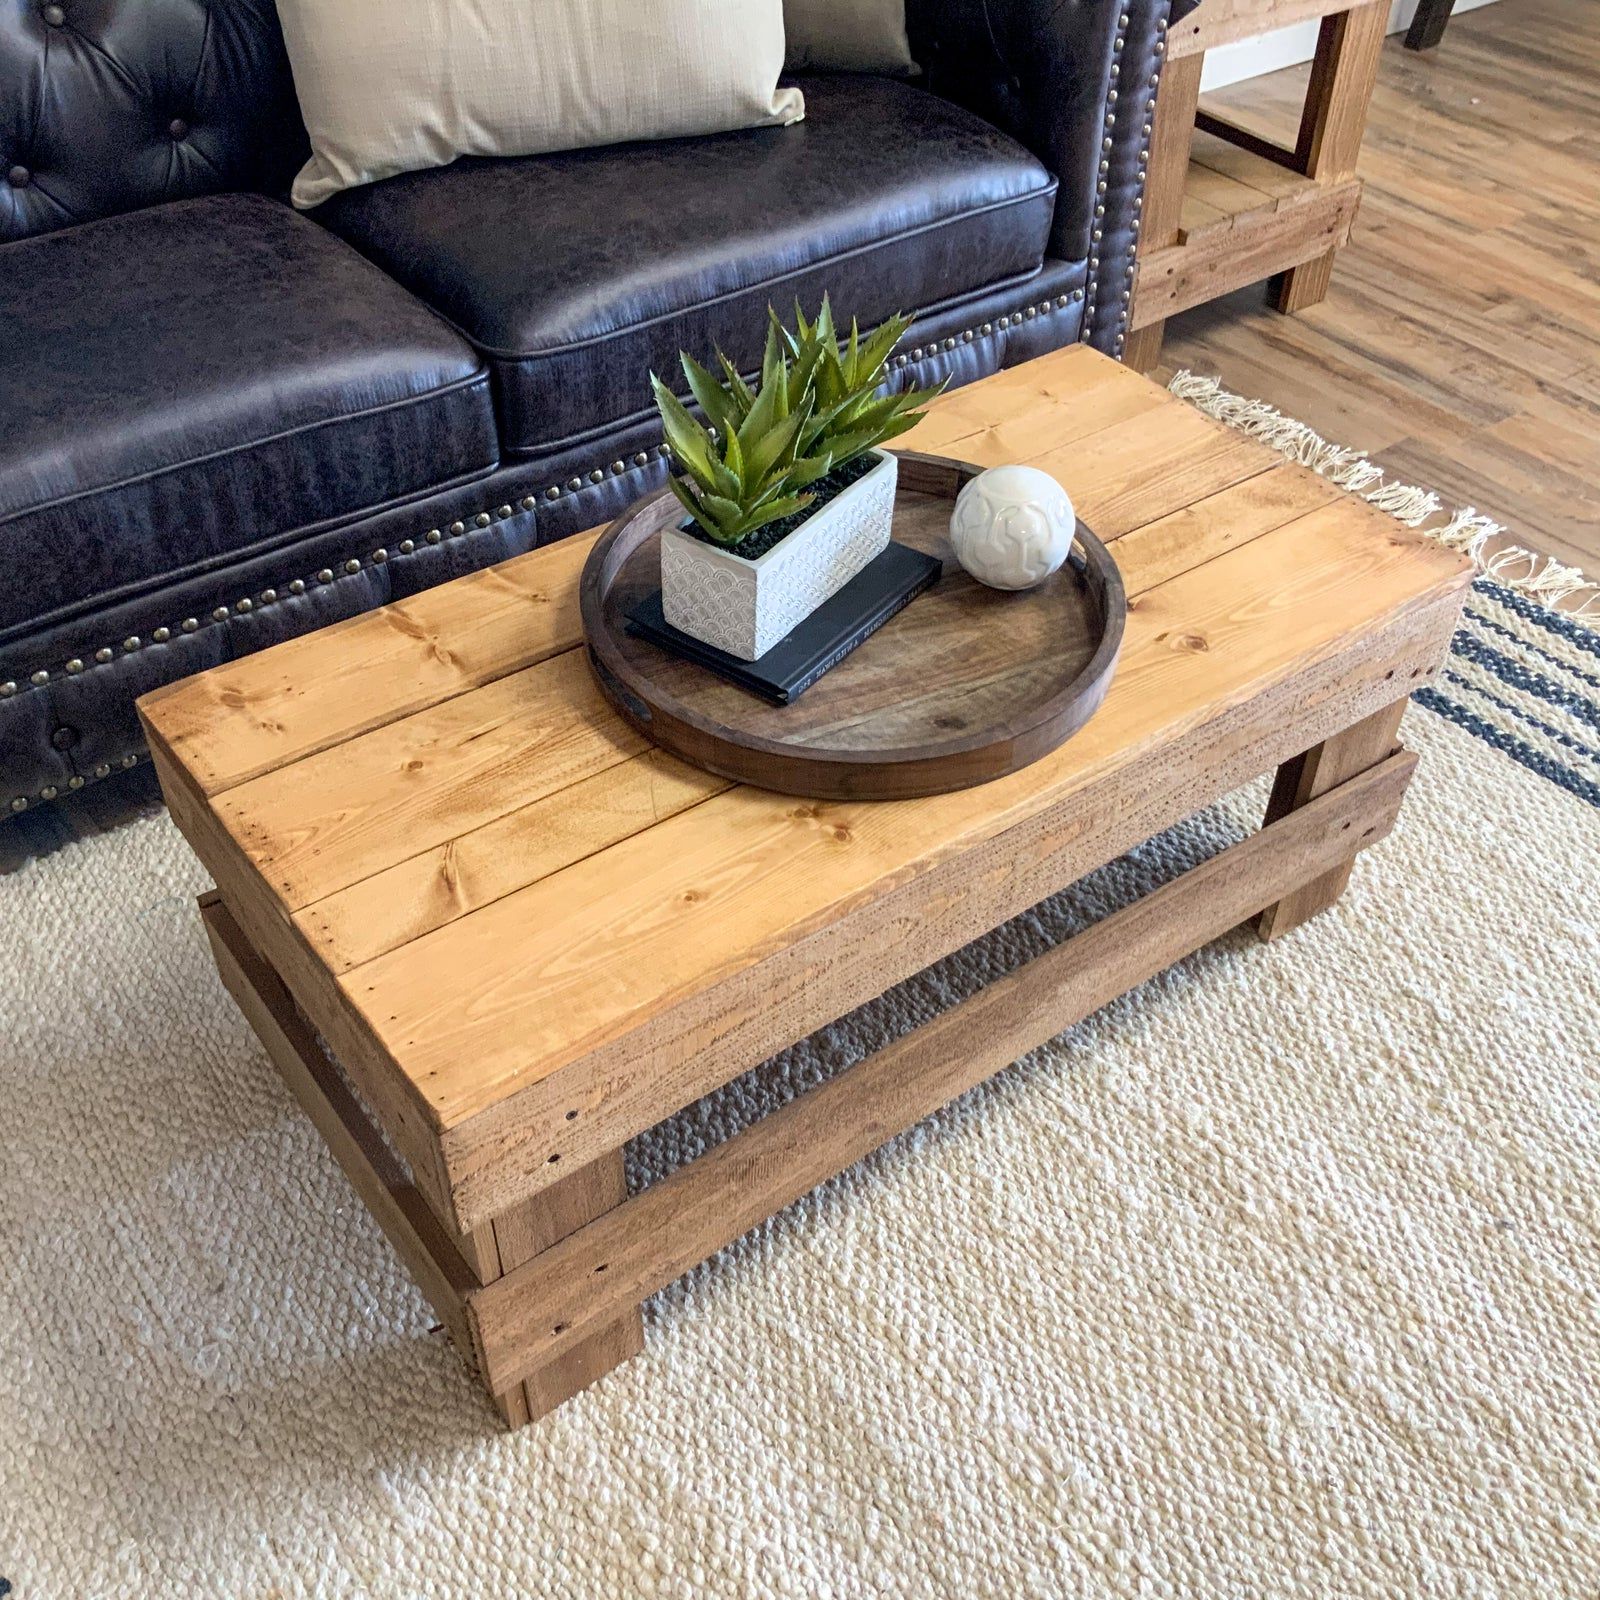 Woven Paths Landmark Pine Solid Wood Farmhouse Coffee Table, Walnut Intended For Woven Paths Coffee Tables (Gallery 6 of 20)